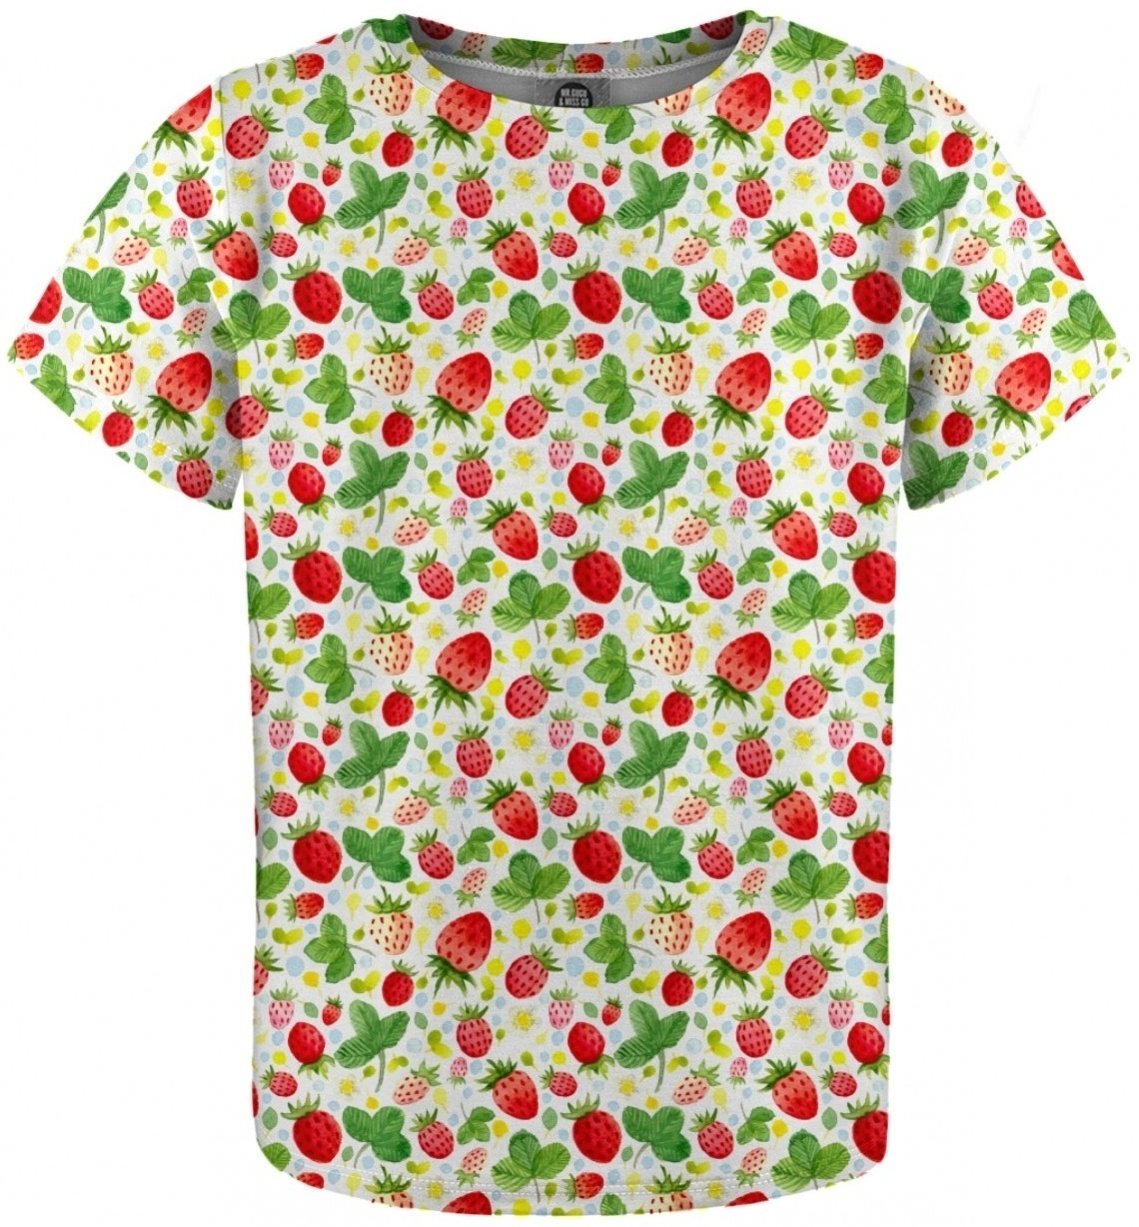 T-Shirt Mr. Gugu and Miss Go T-Shirt Strawberries Pattern 6 - 8 Y